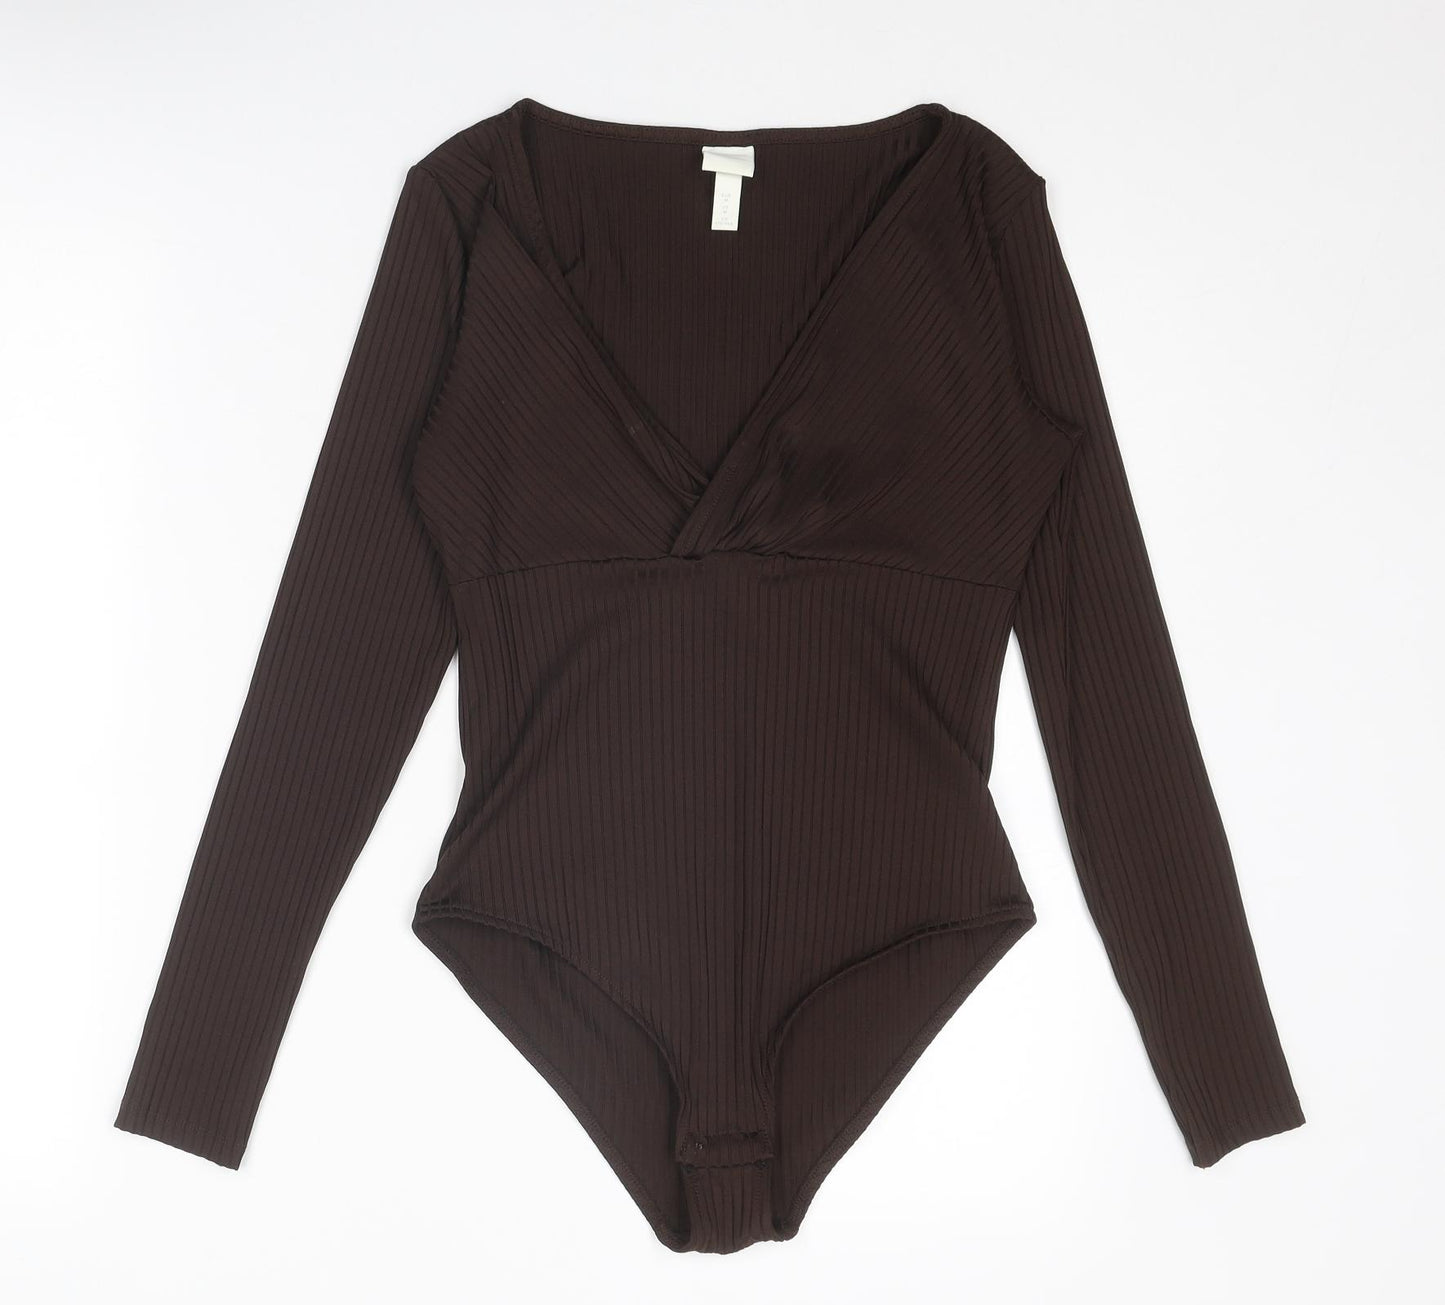 H&M Womens Brown Polyester Bodysuit One-Piece Size M Snap